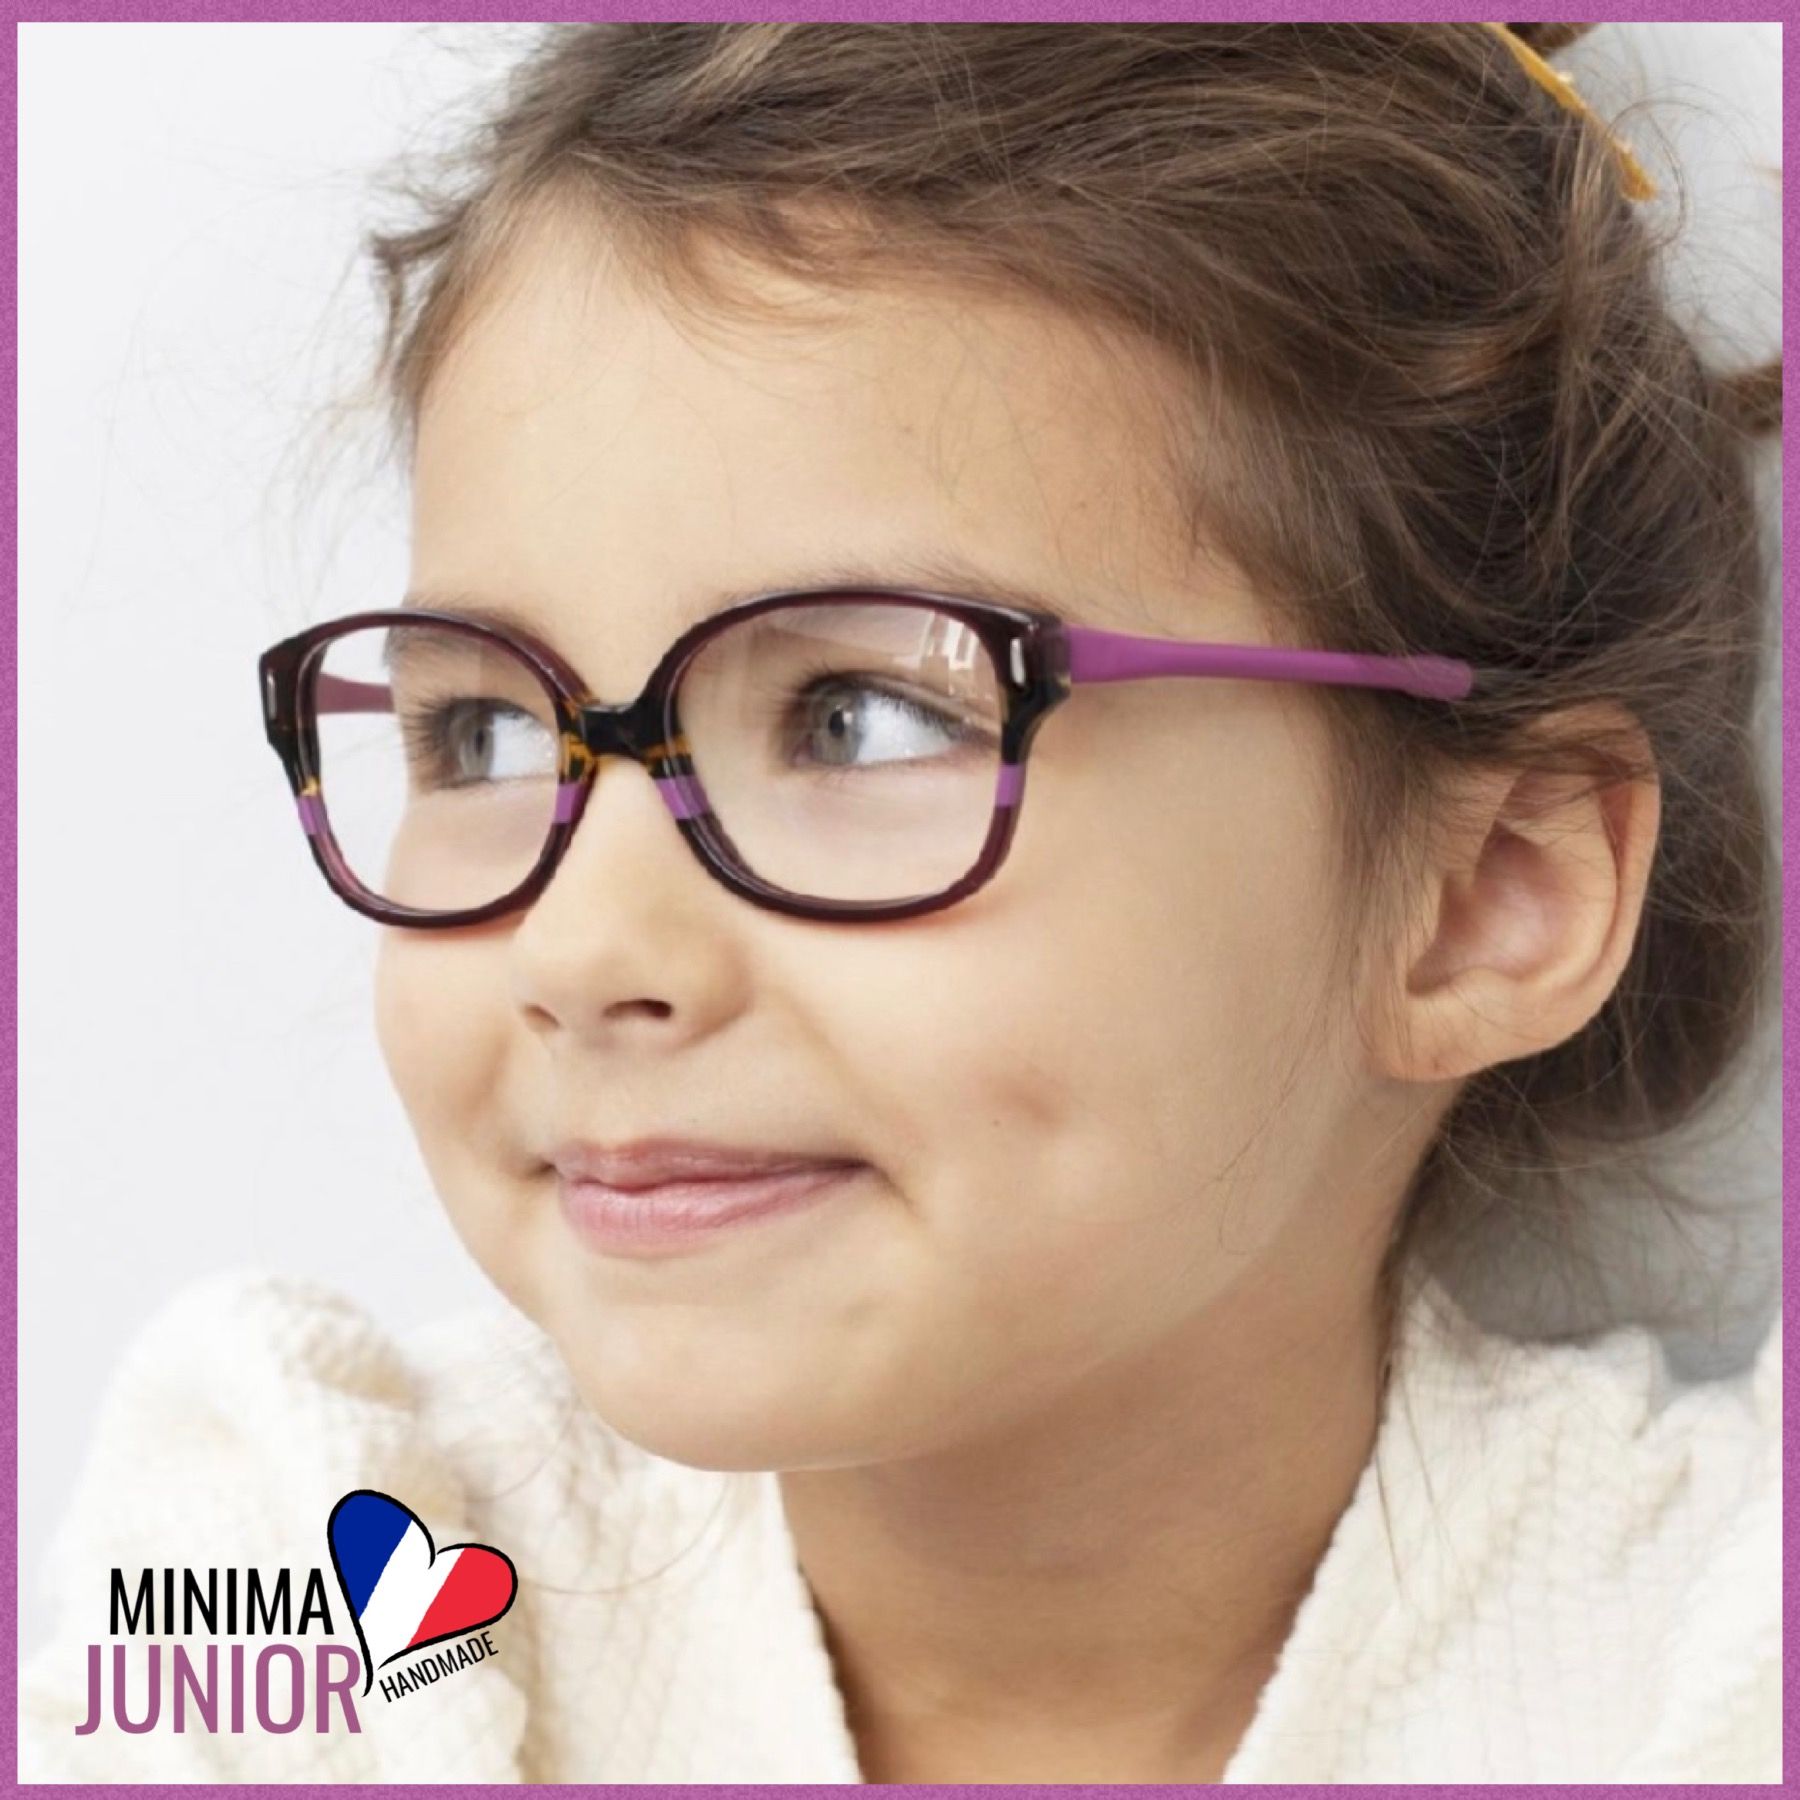 Junior Collection by Minima